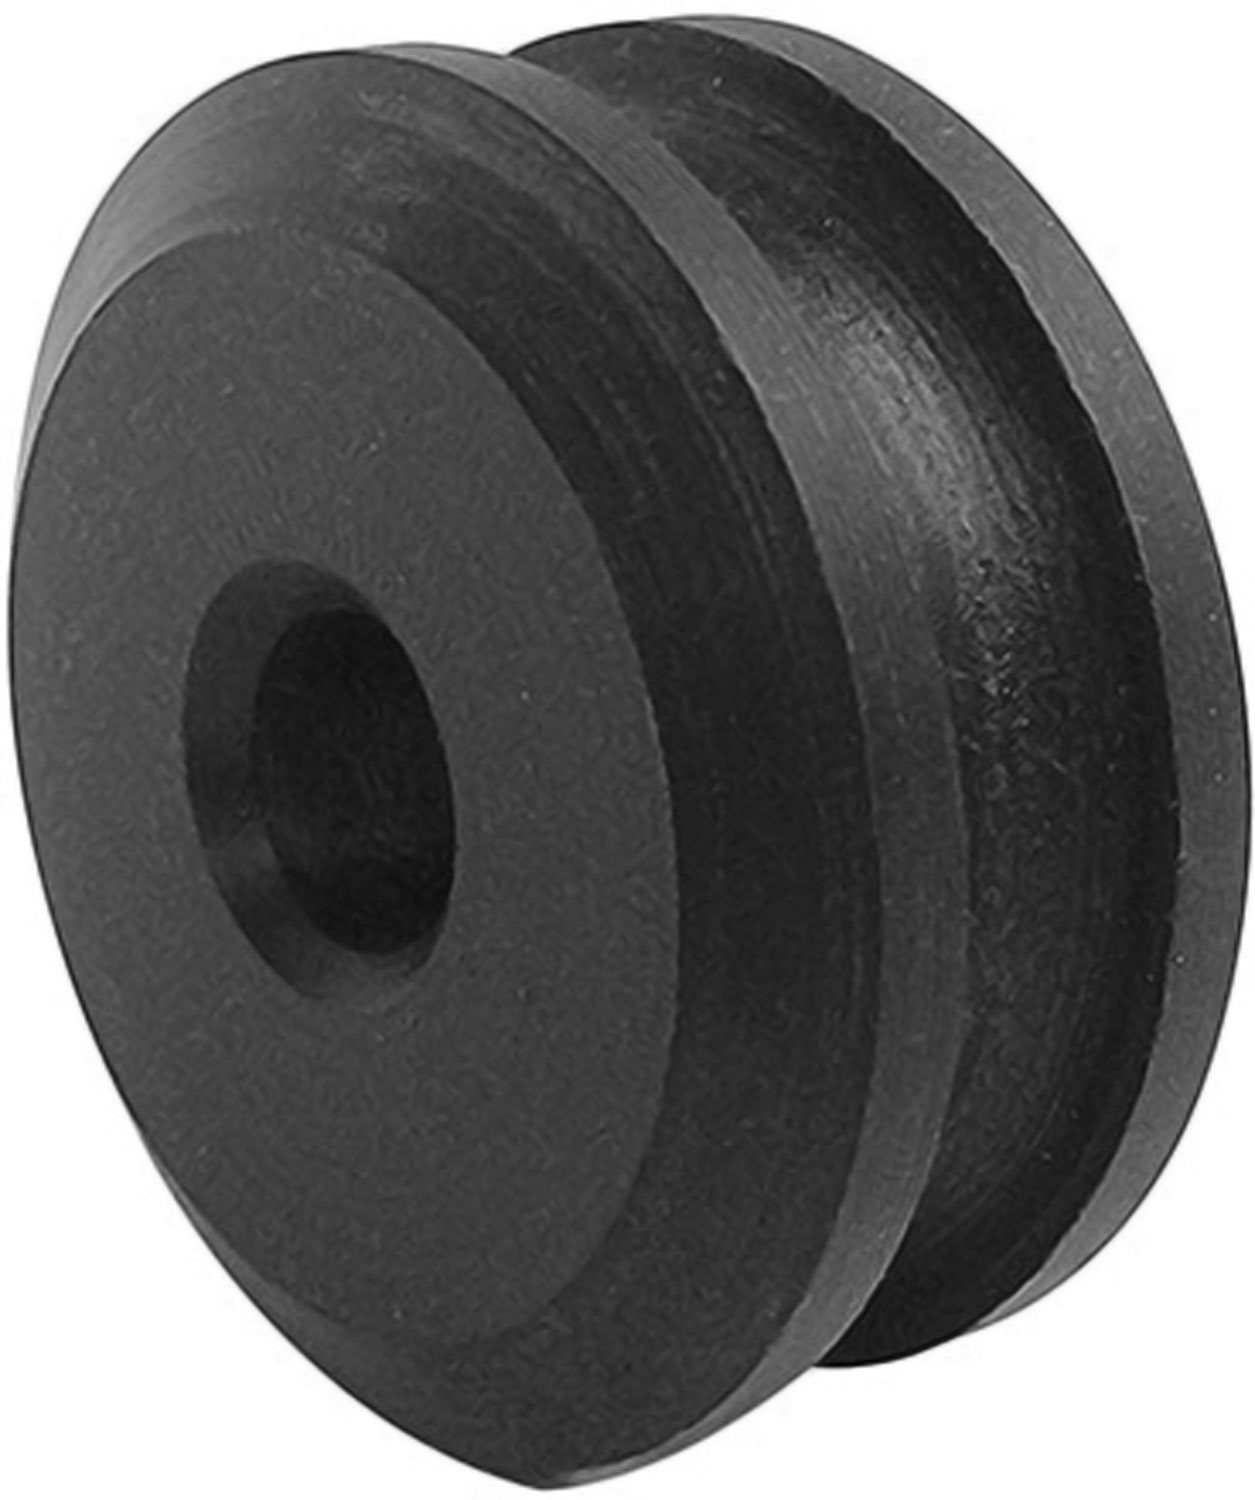 Global Truss St-132 Large Pulley – Replacement Large Pulley For St-132 341249 Accessories Digital DJ Gear